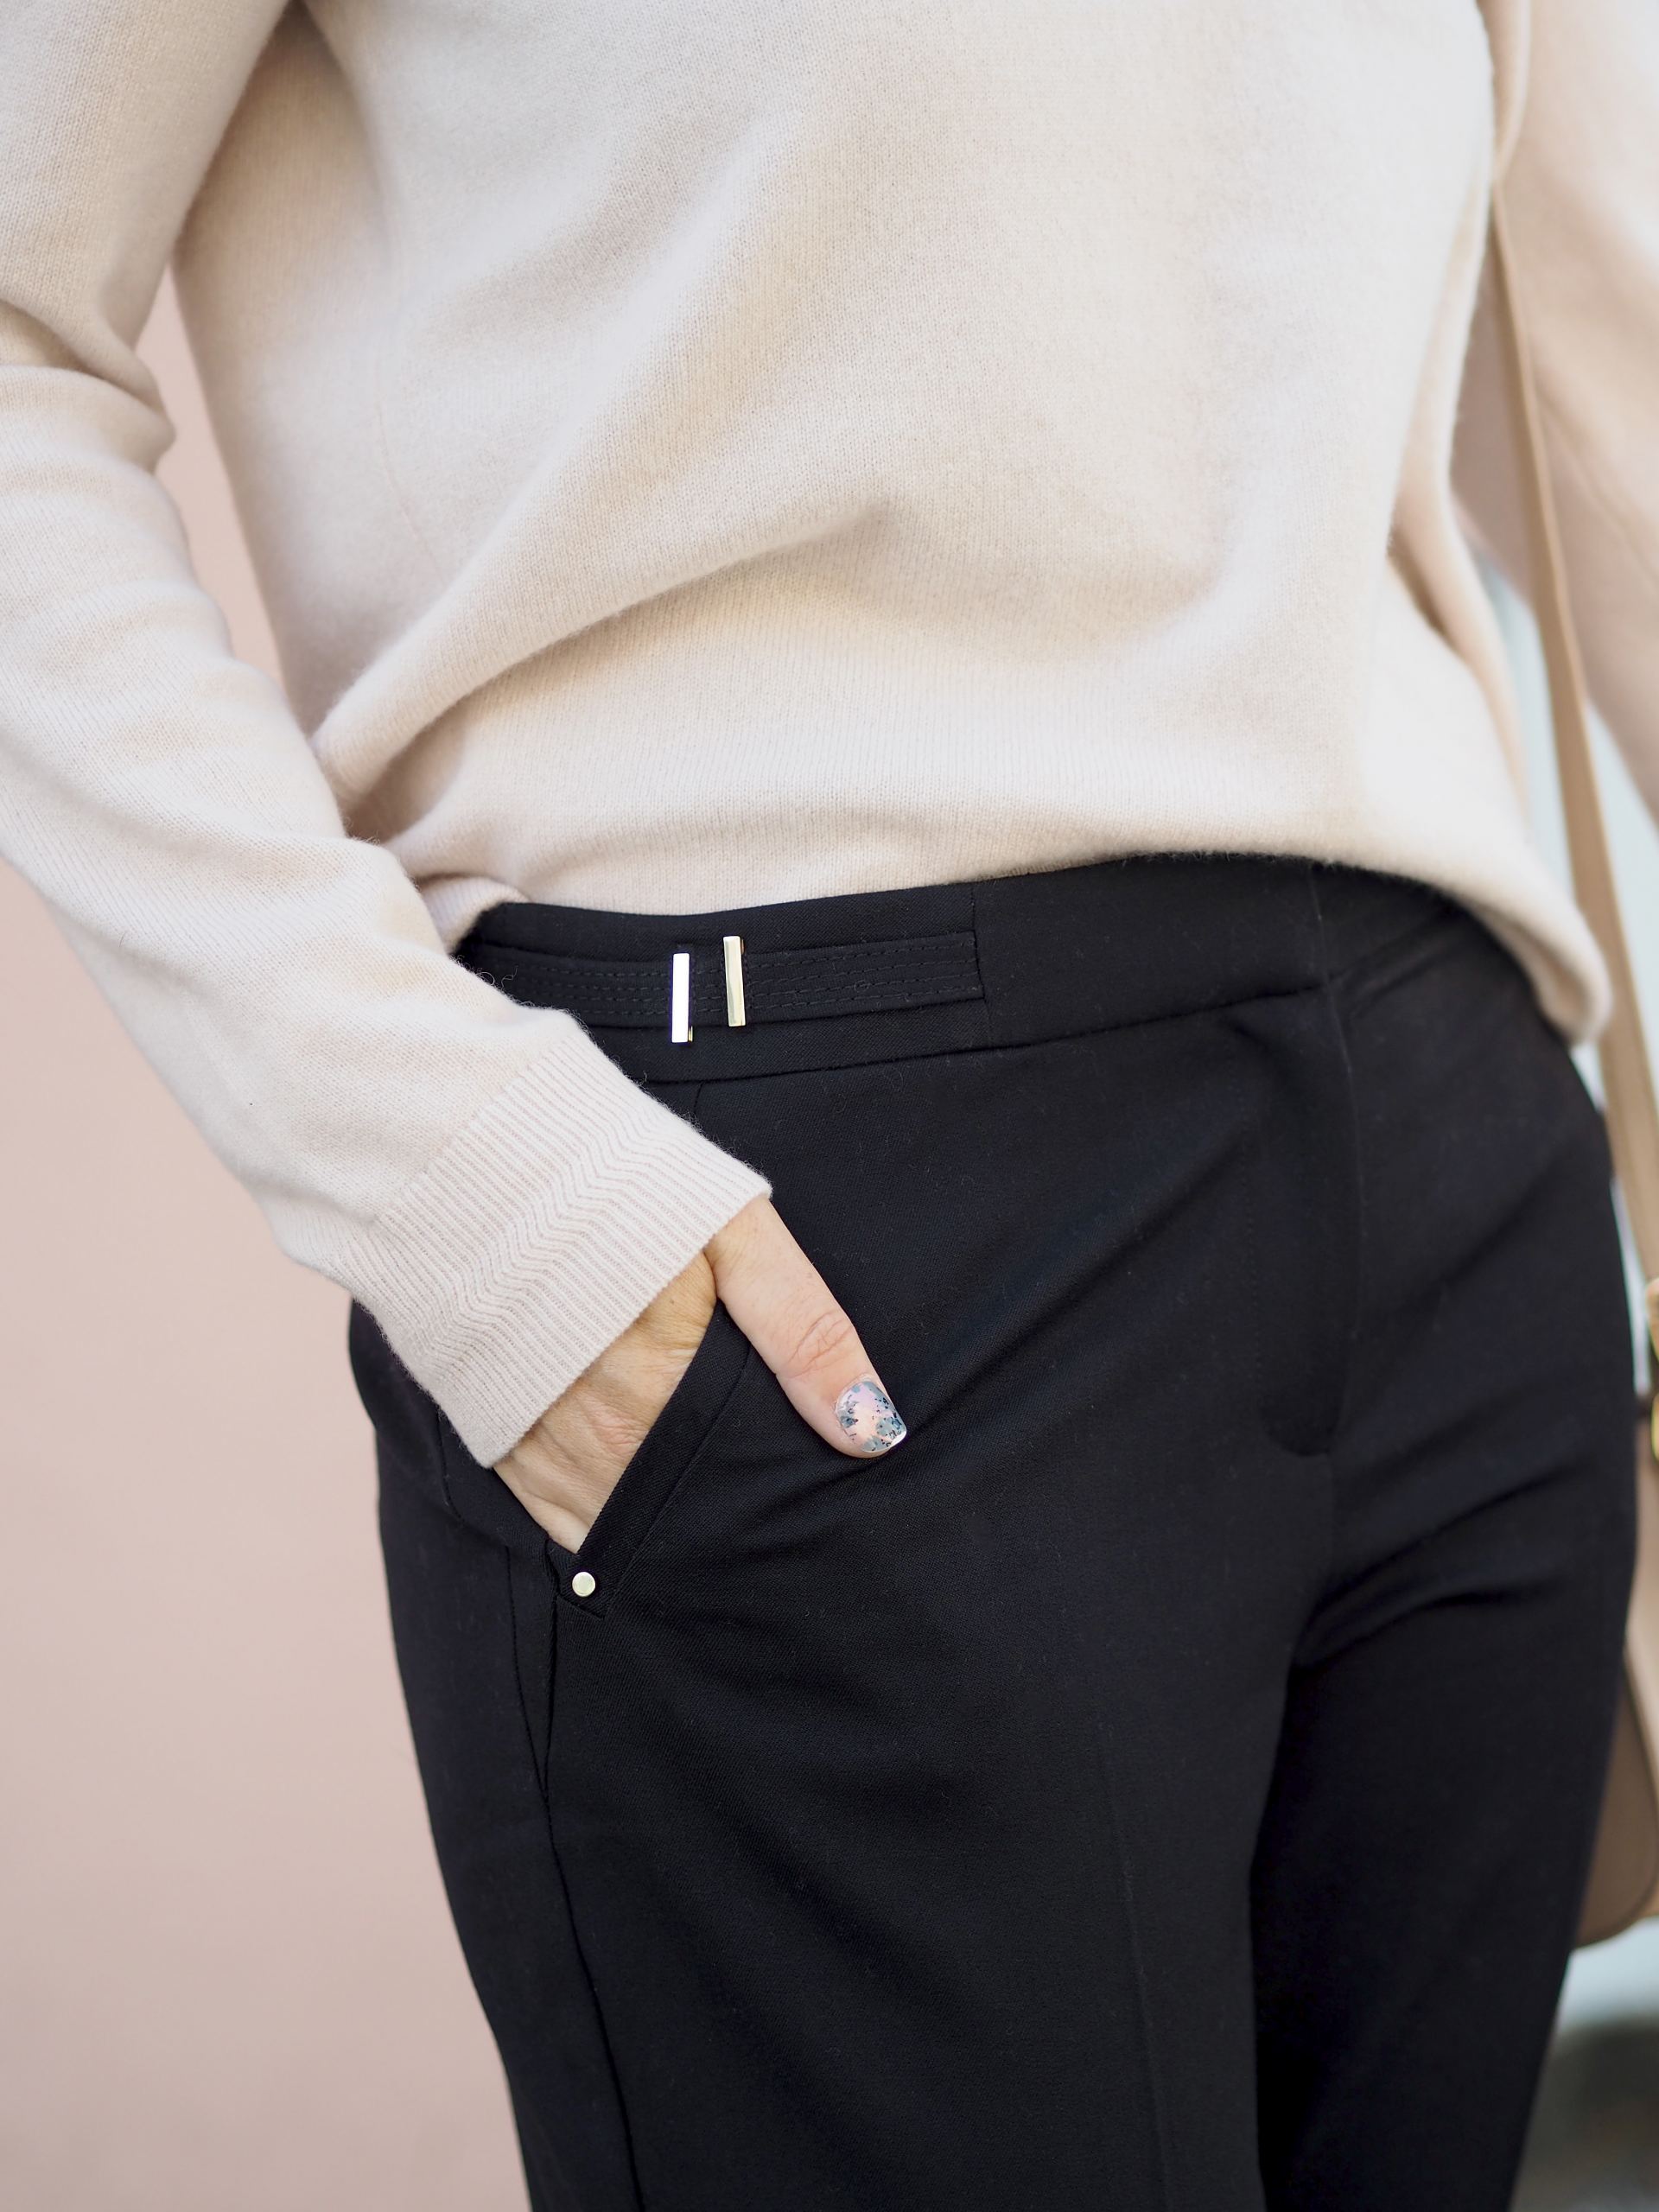 wear your work trousers at the weekend